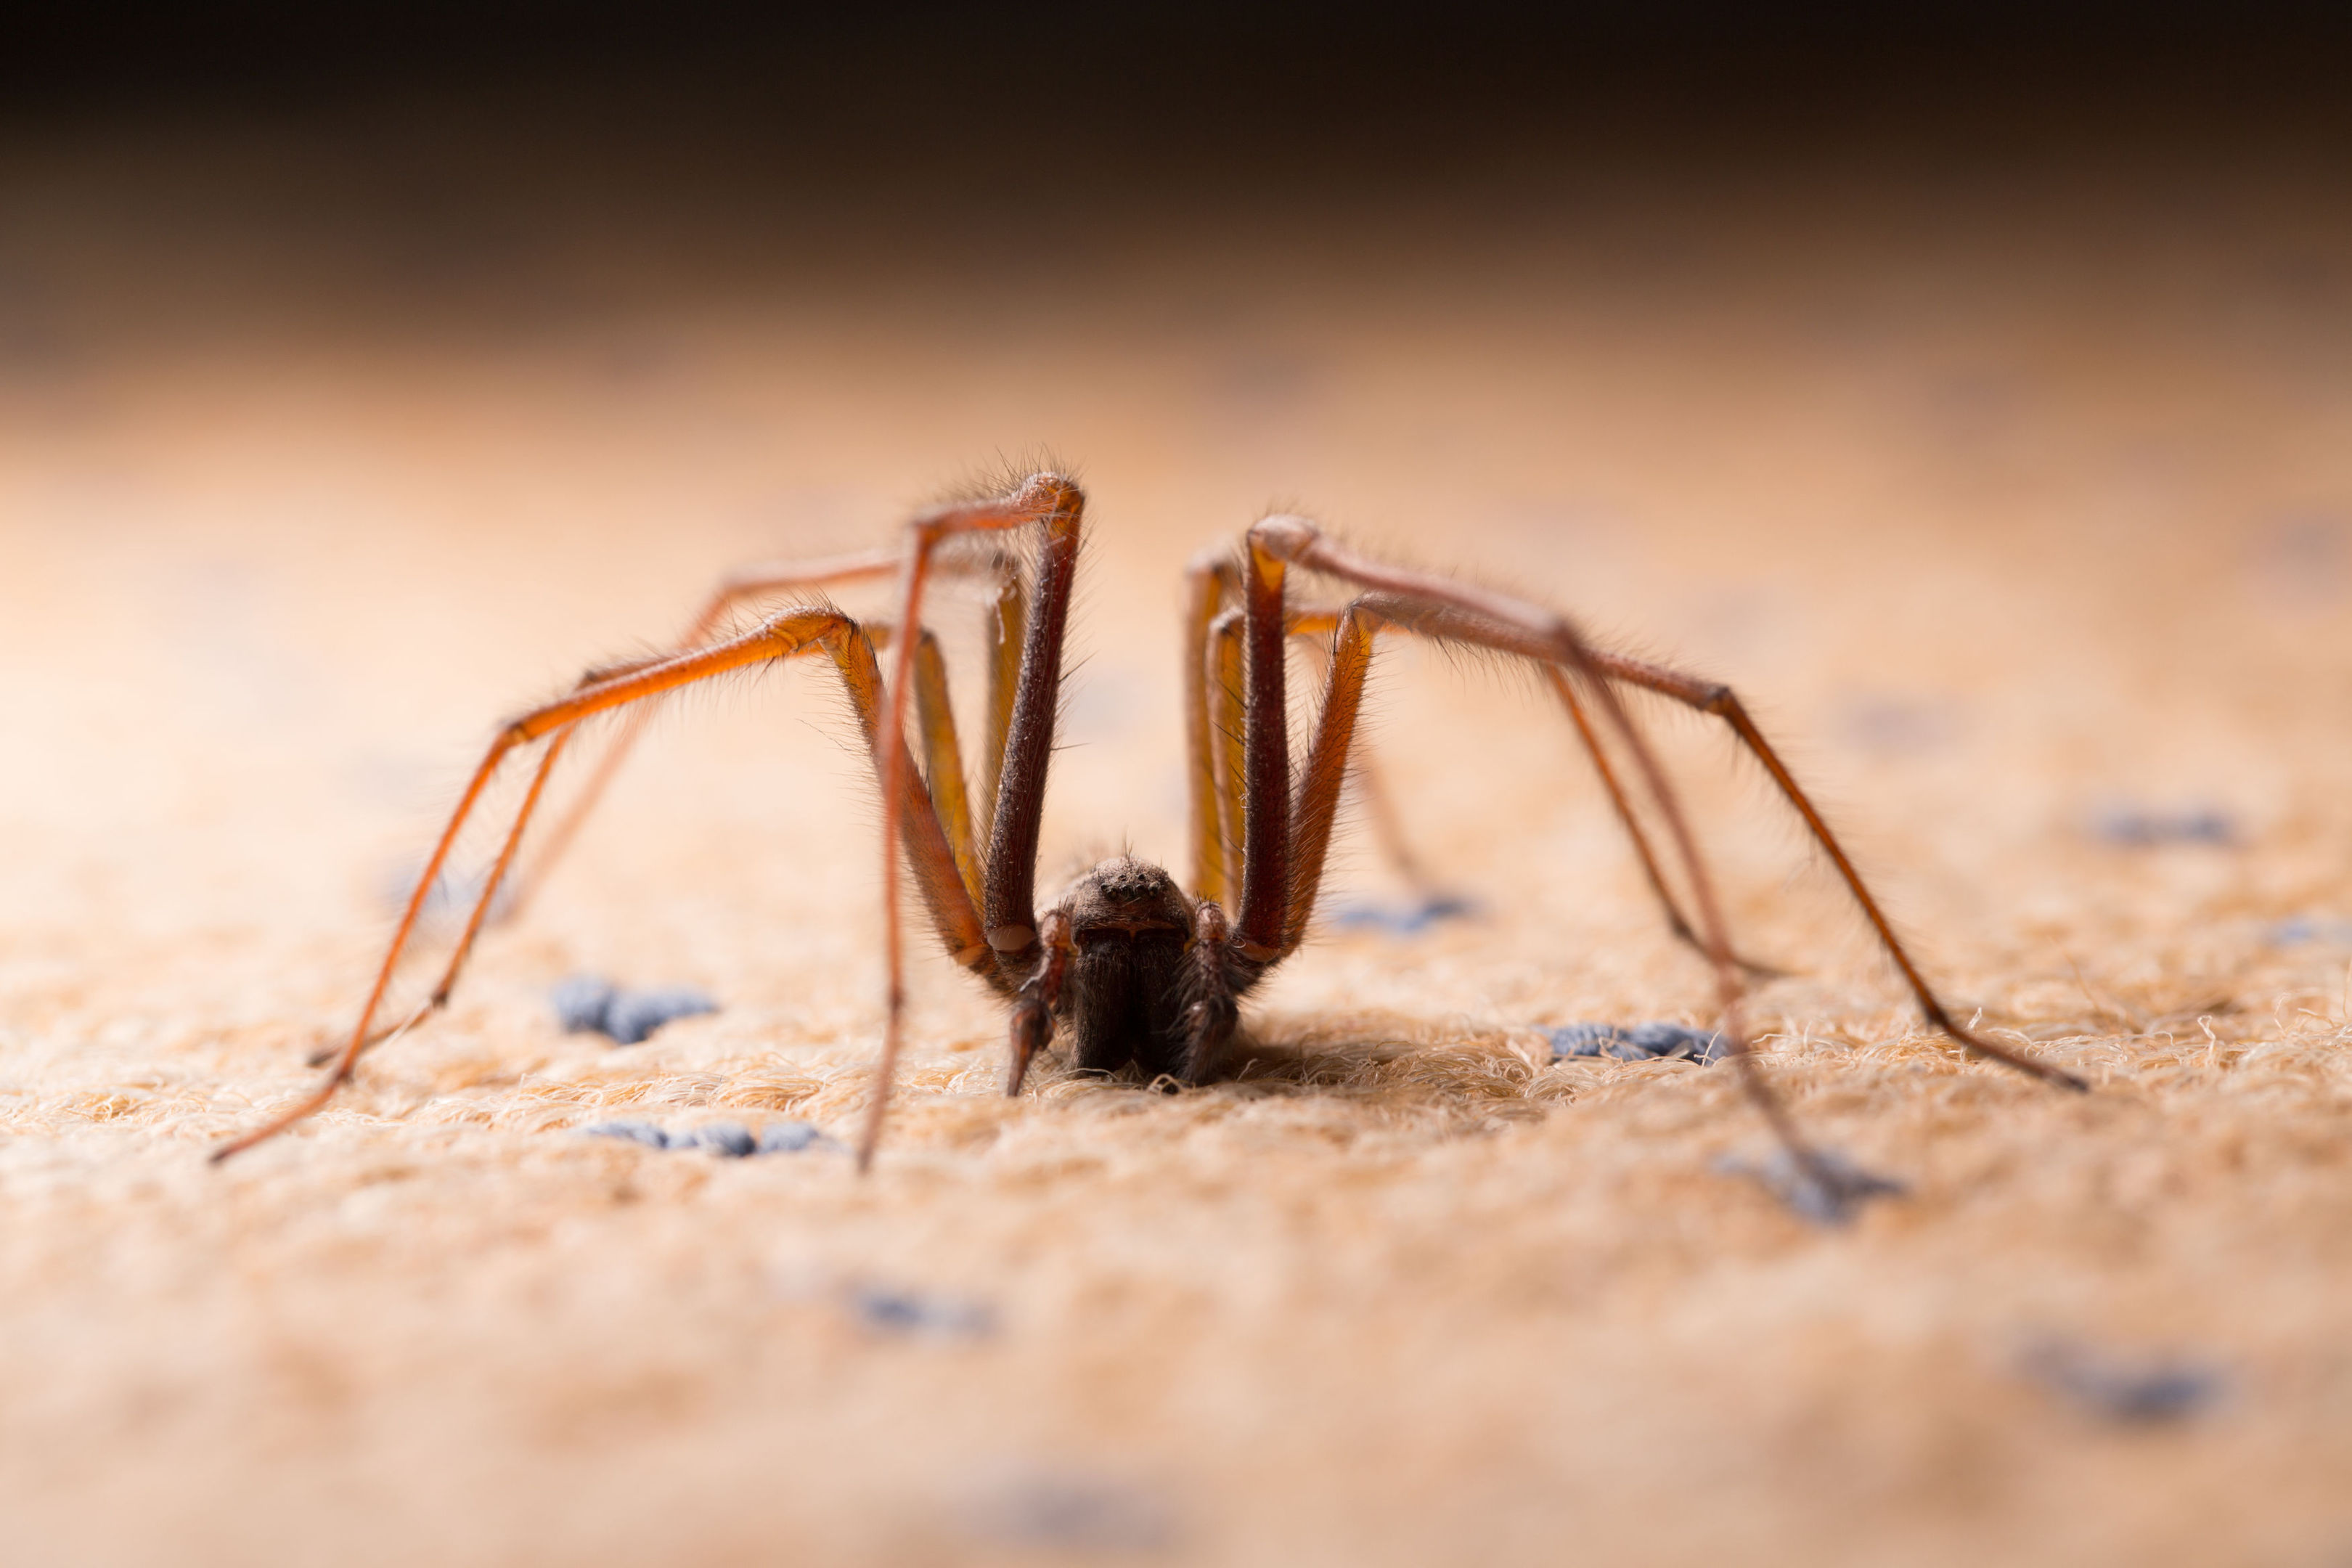 Neighbours thought the man, who was trying to rid himself of a spider, was attacking a woman